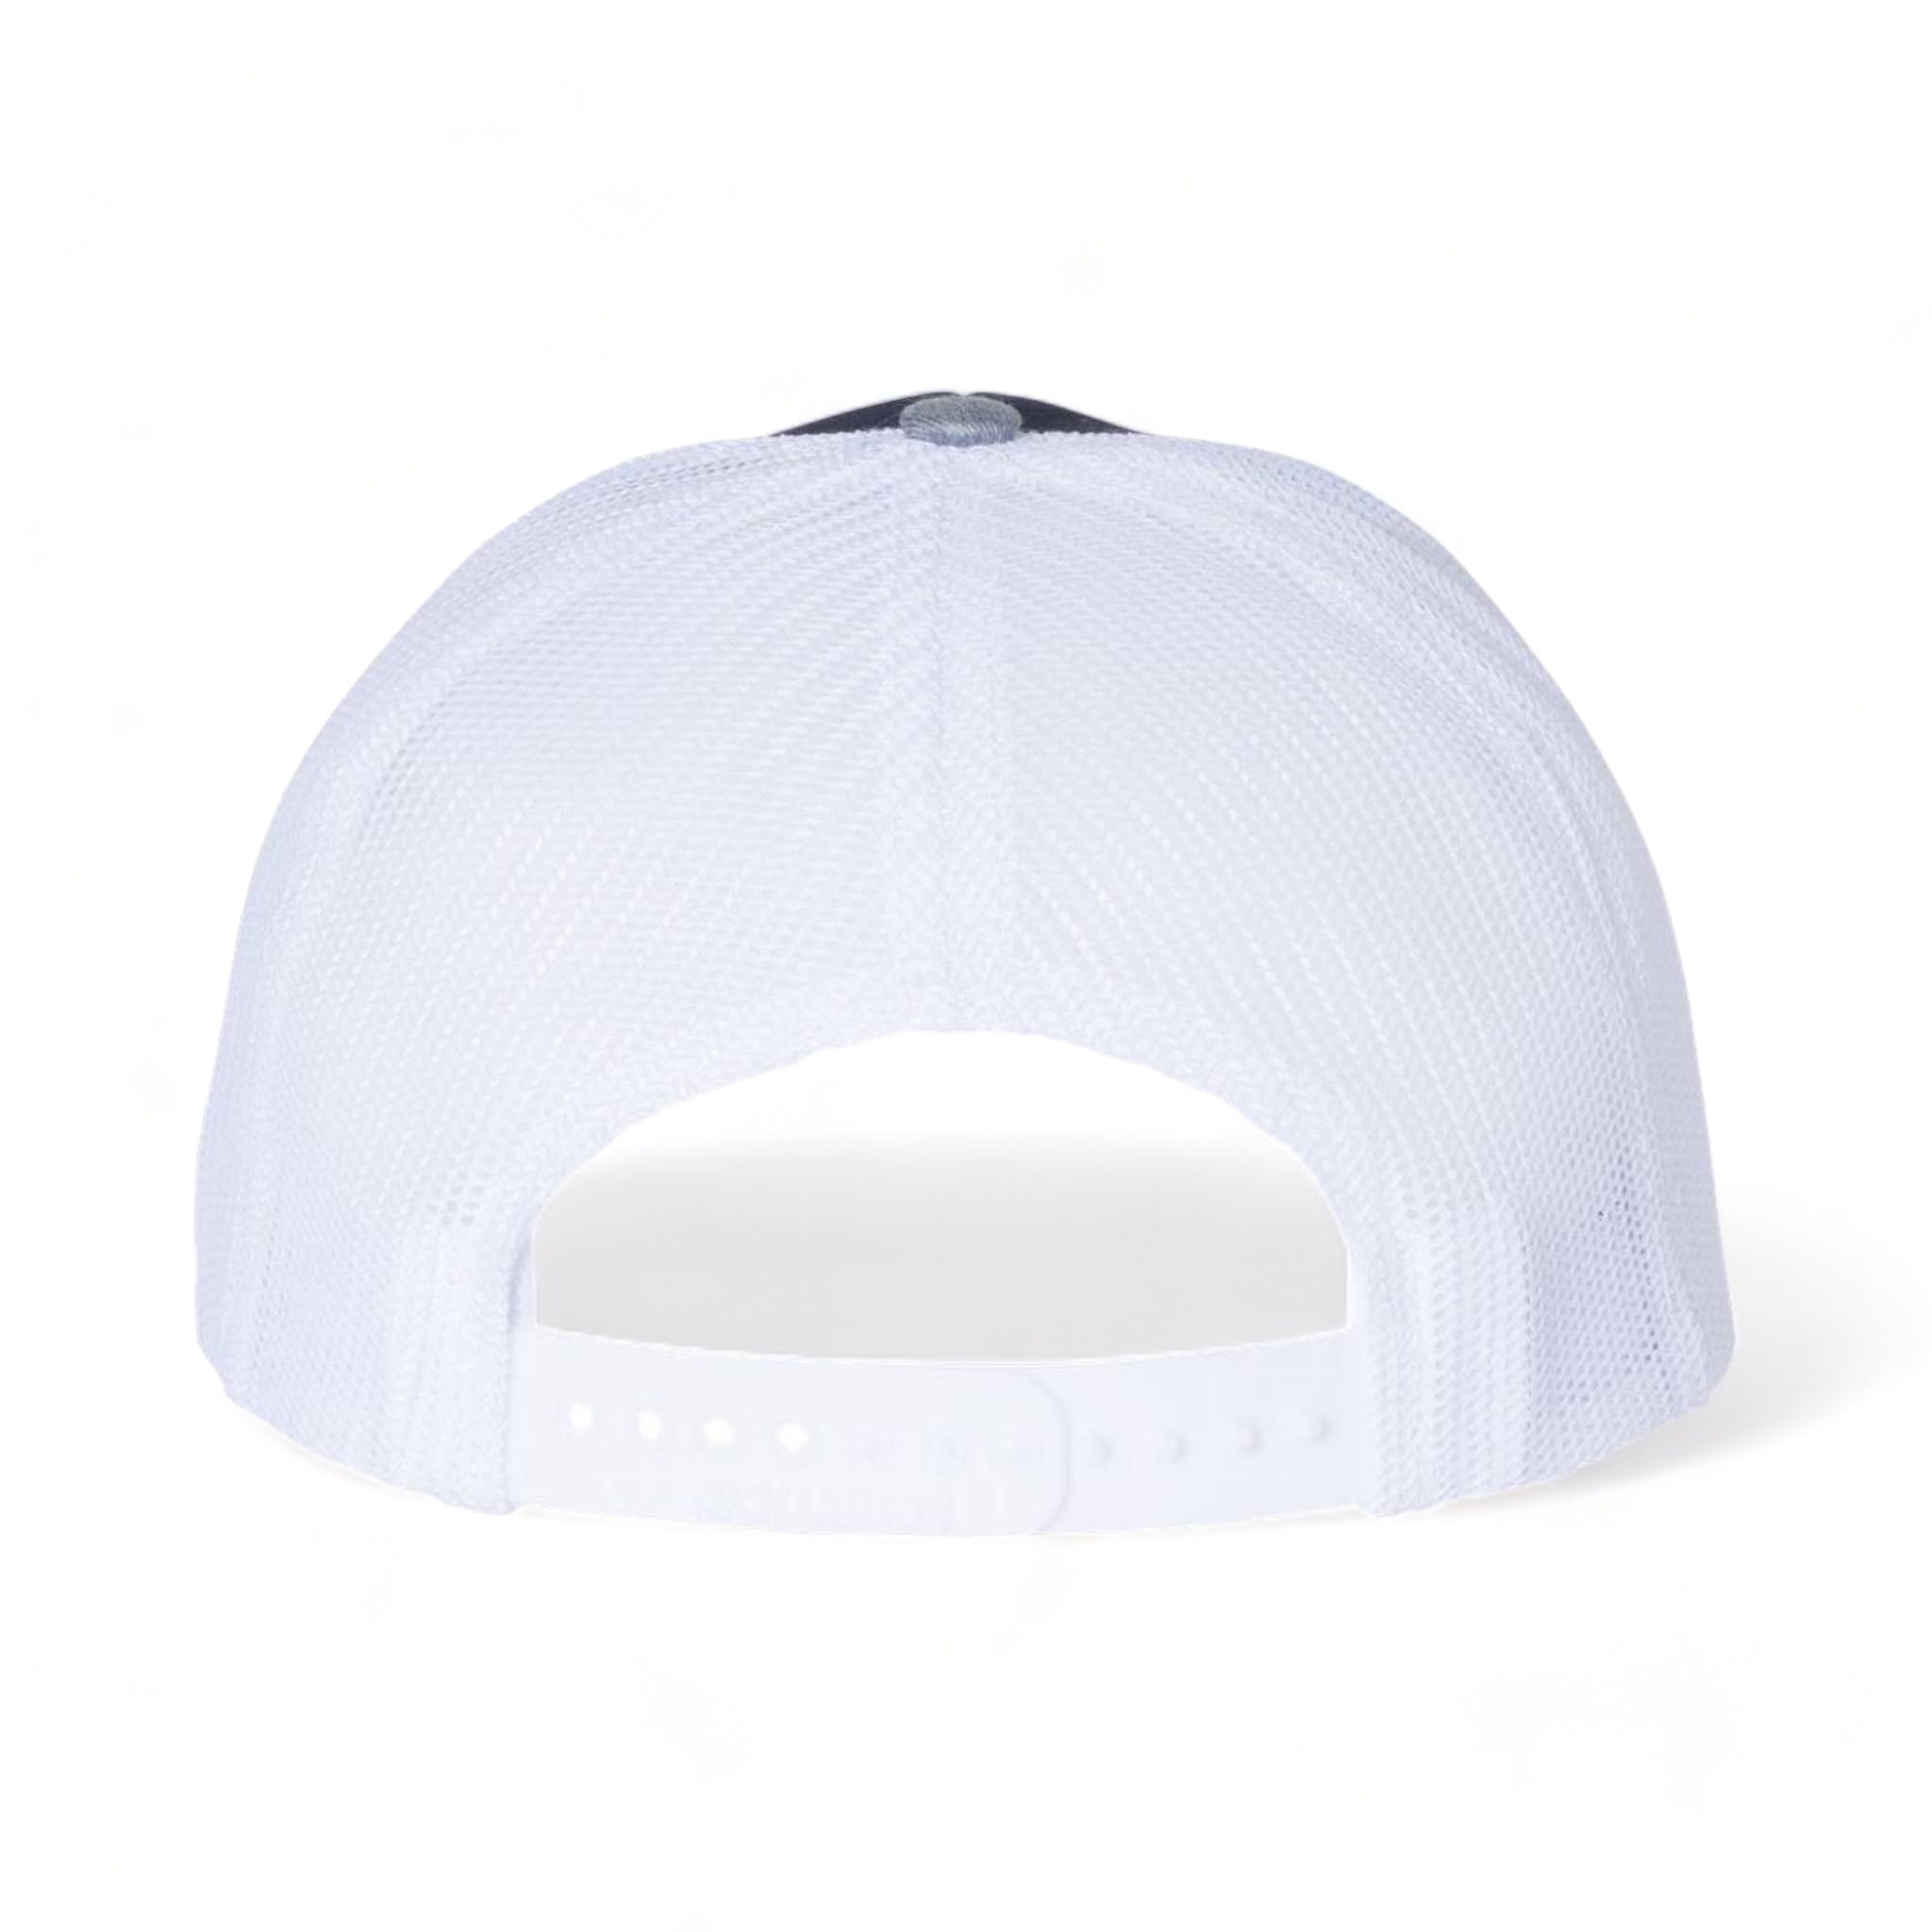 Back view of Richardson 112 custom hat in navy, white and heather grey